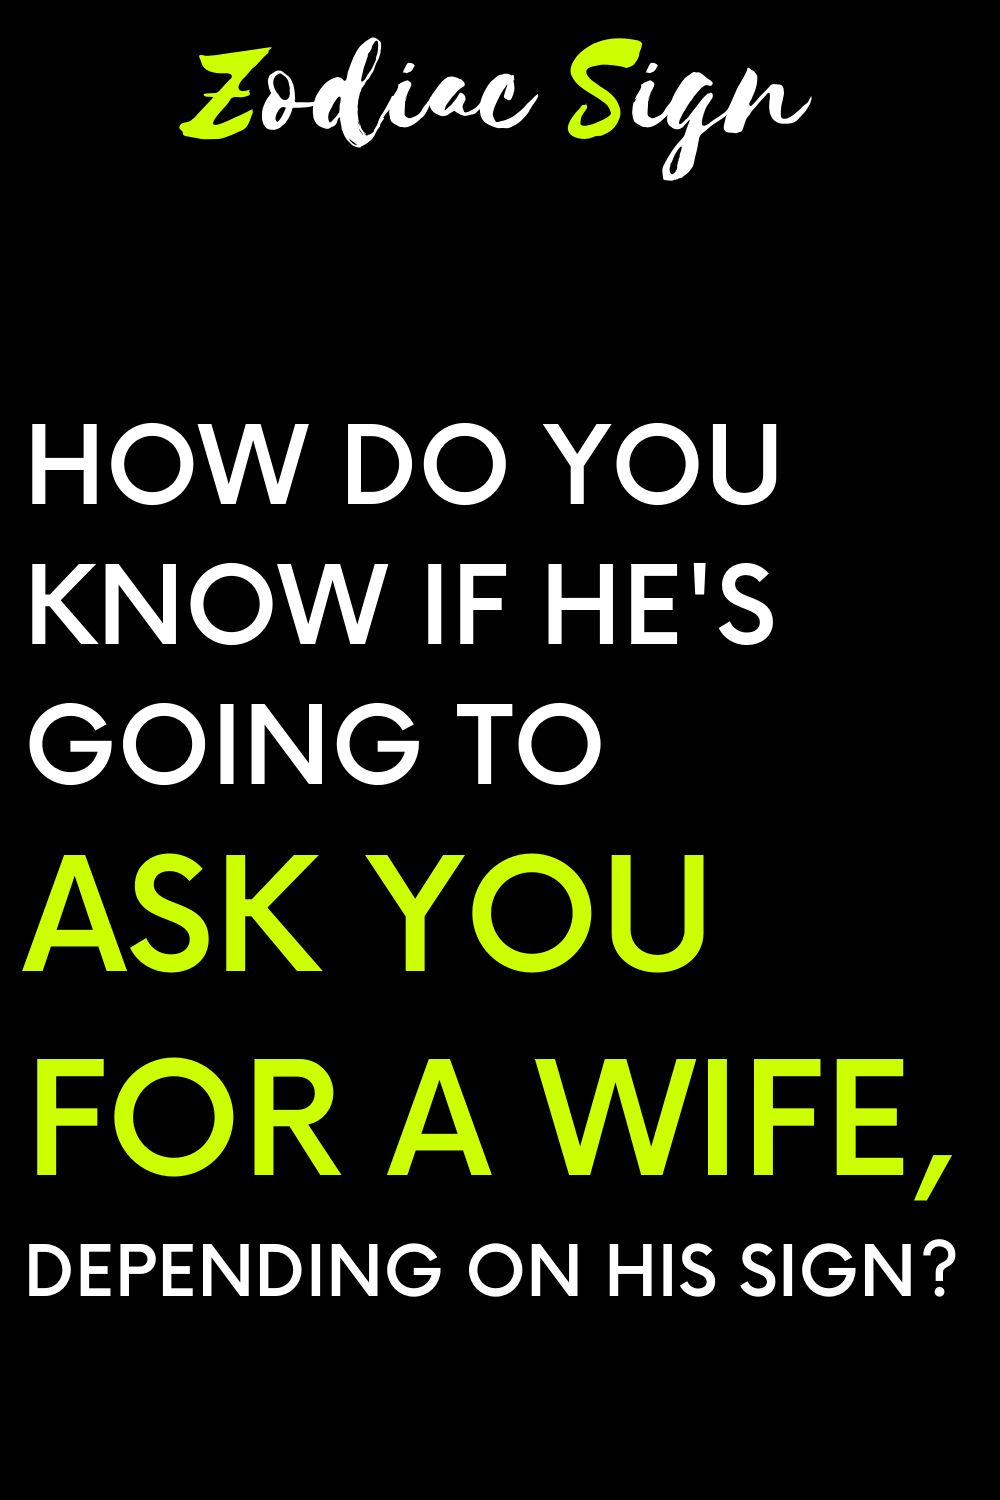 How do you know if he's going to ask you for a wife, depending on his sign?